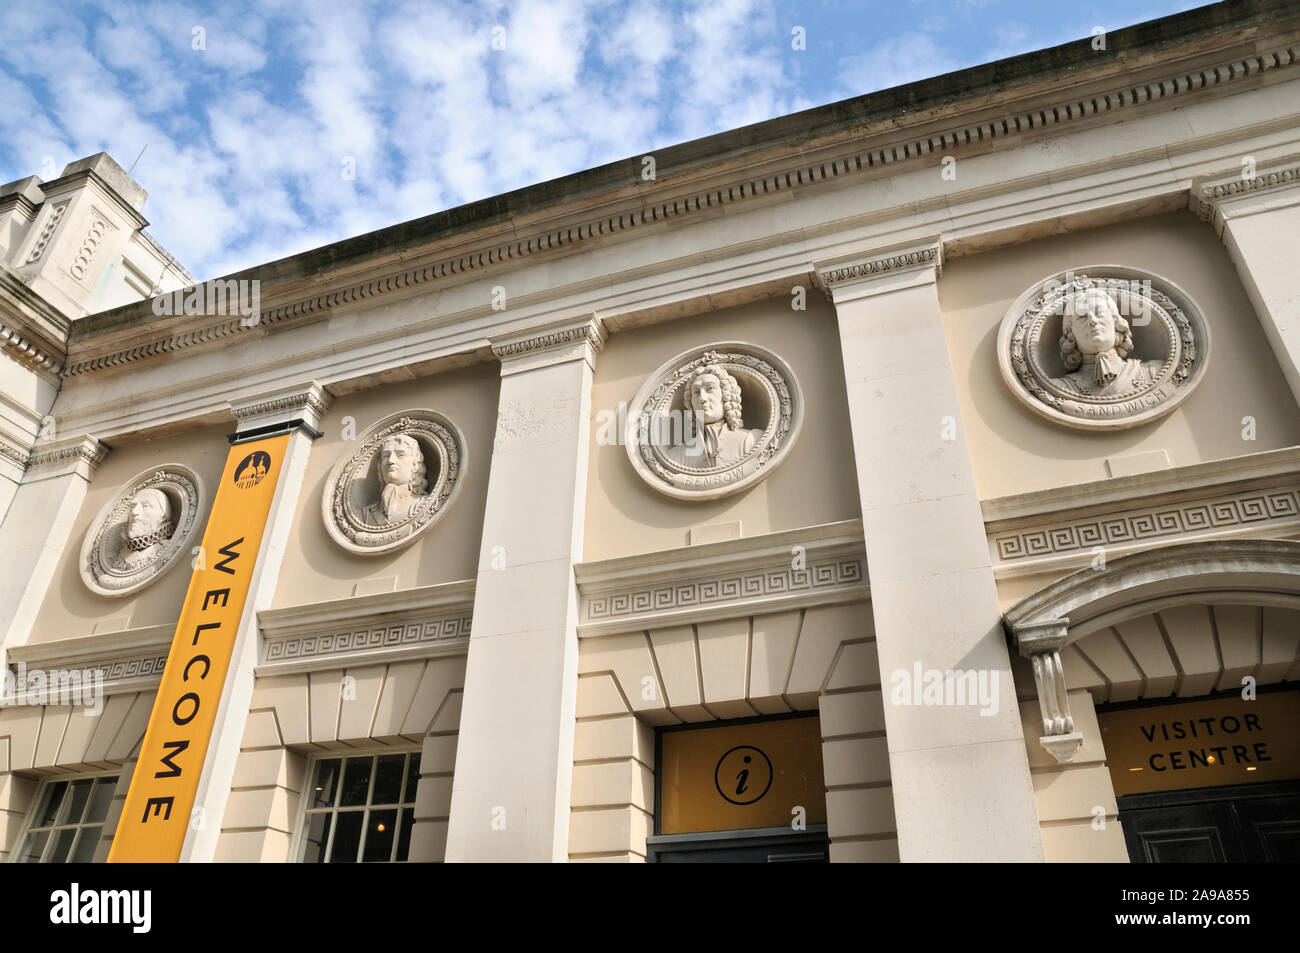 Discover Greenwich Visitor Centre at the Old Royal Naval College Pepys Building featuring roundels of famous naval heroes, Greenwich, London, UK Stock Photo